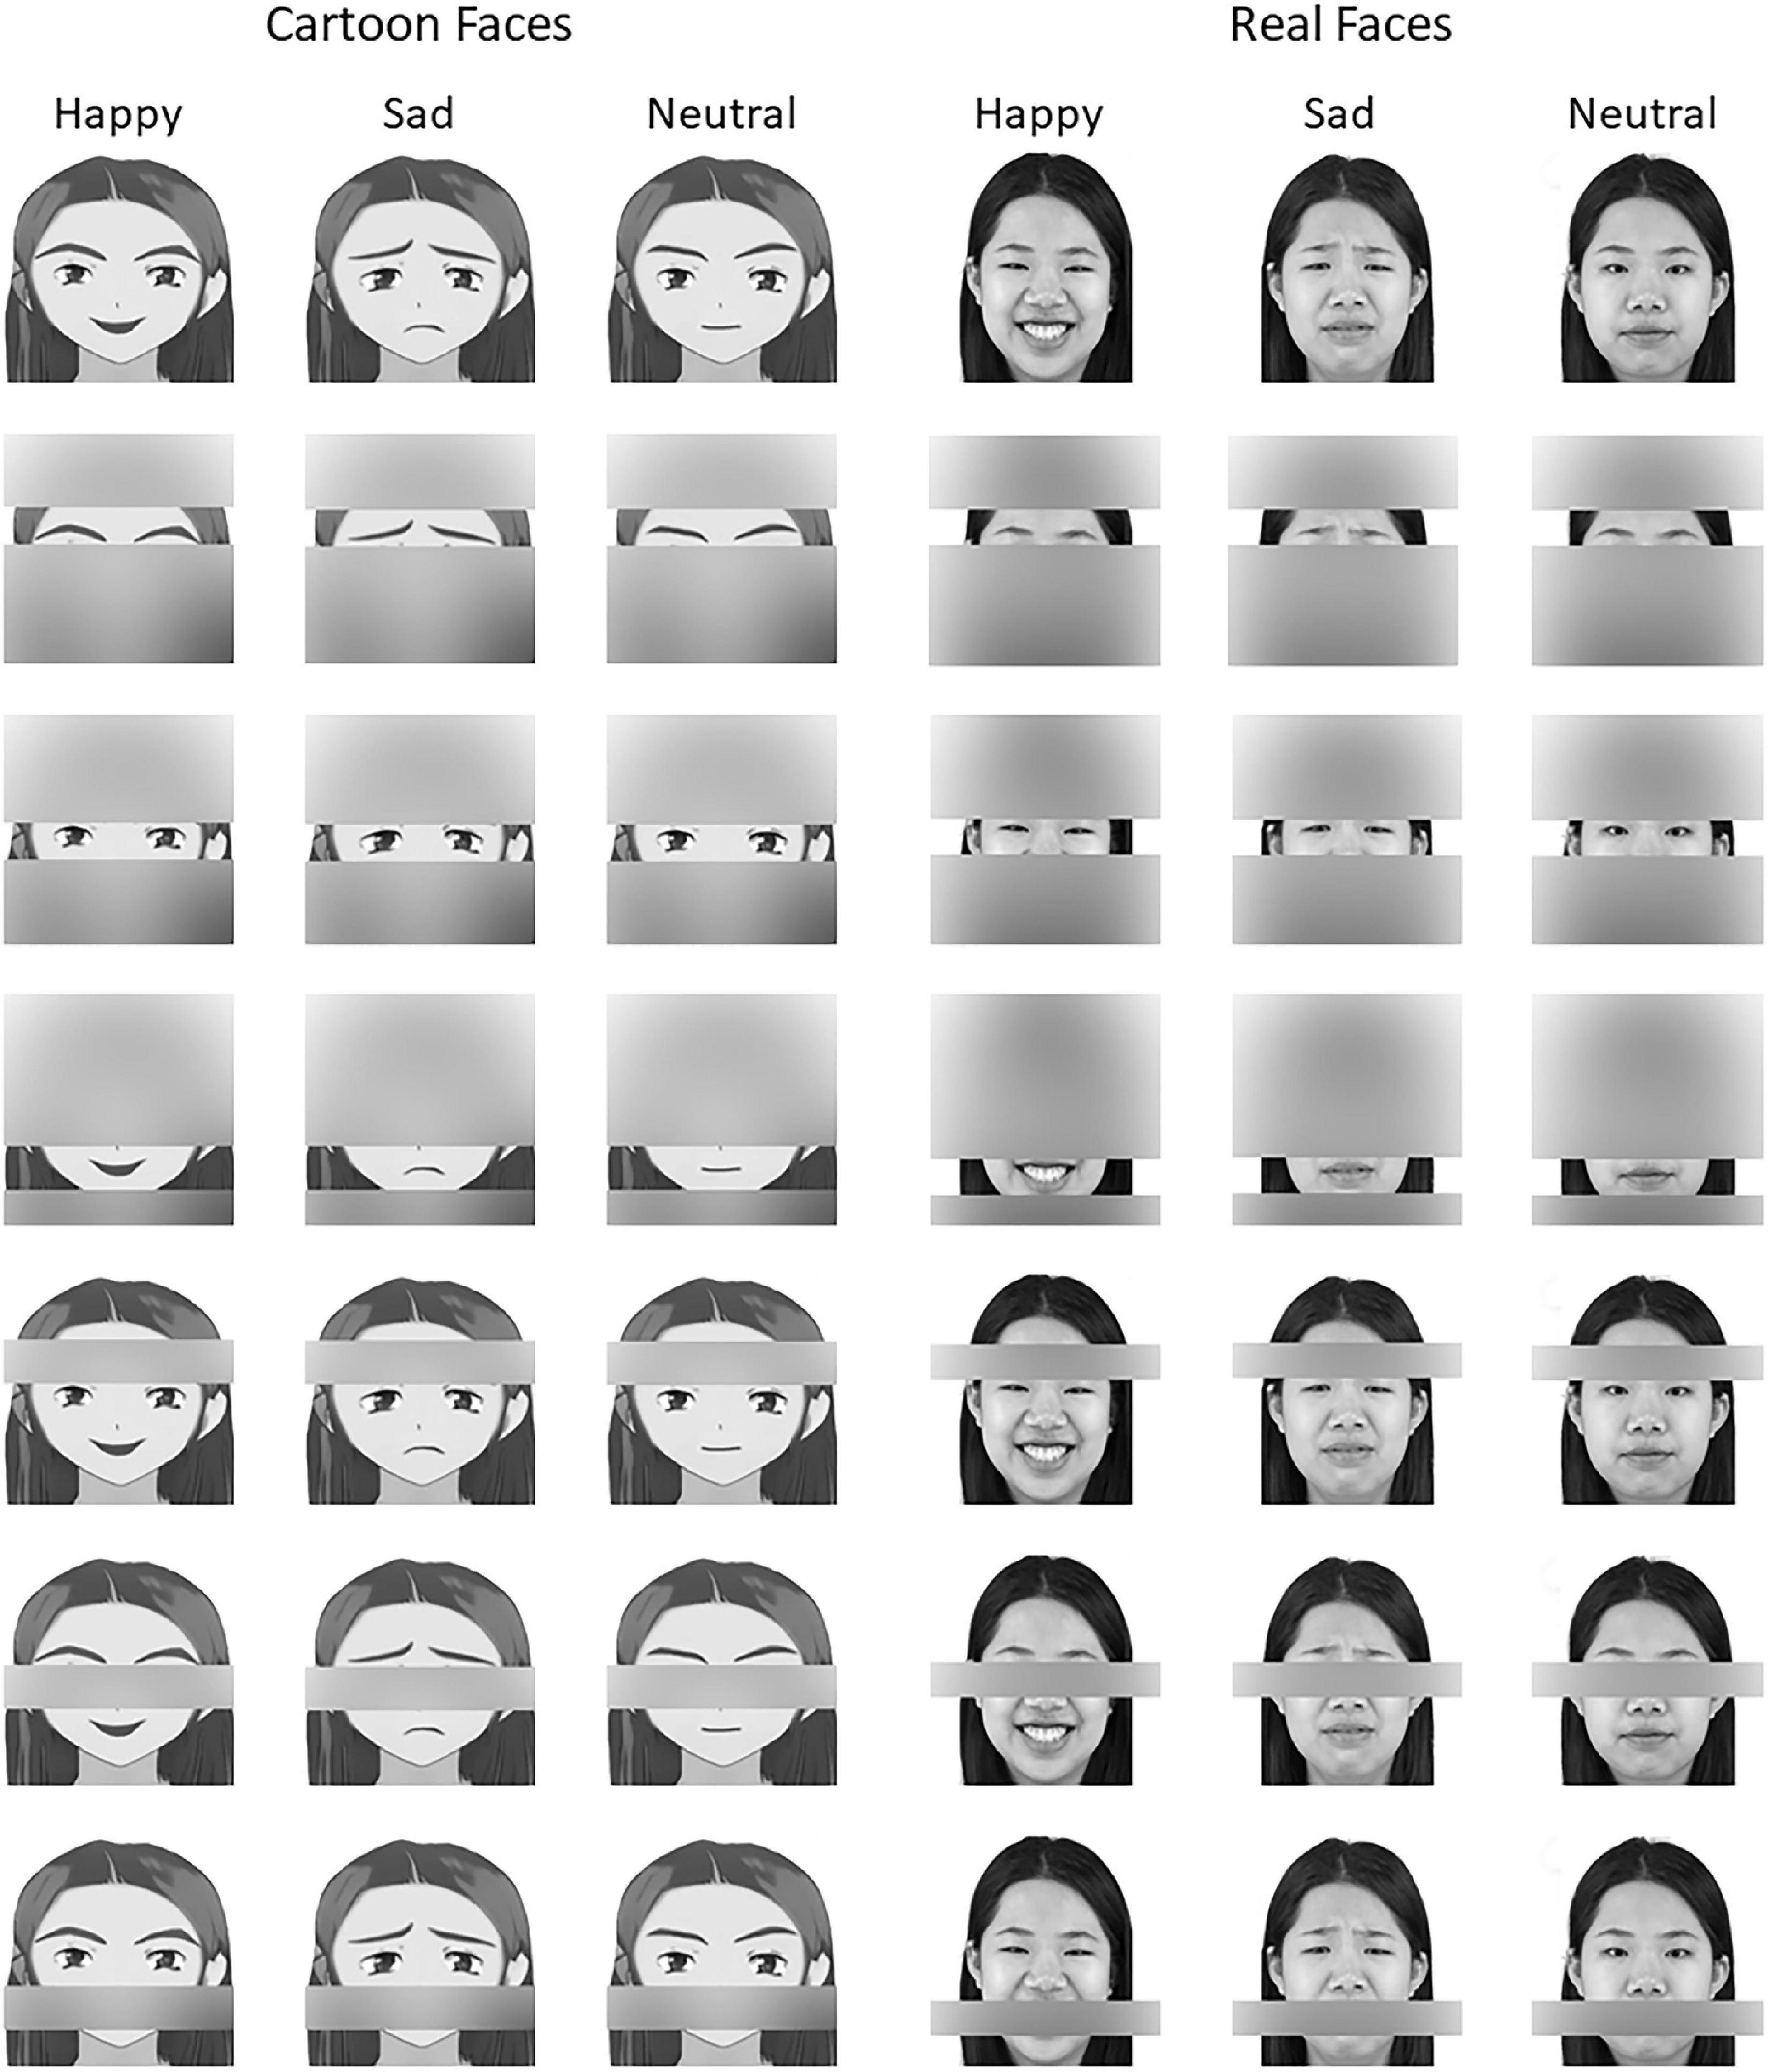 Face Shape Personality Test: Your Face Shape Reveals Your Hidden  Personality Traits